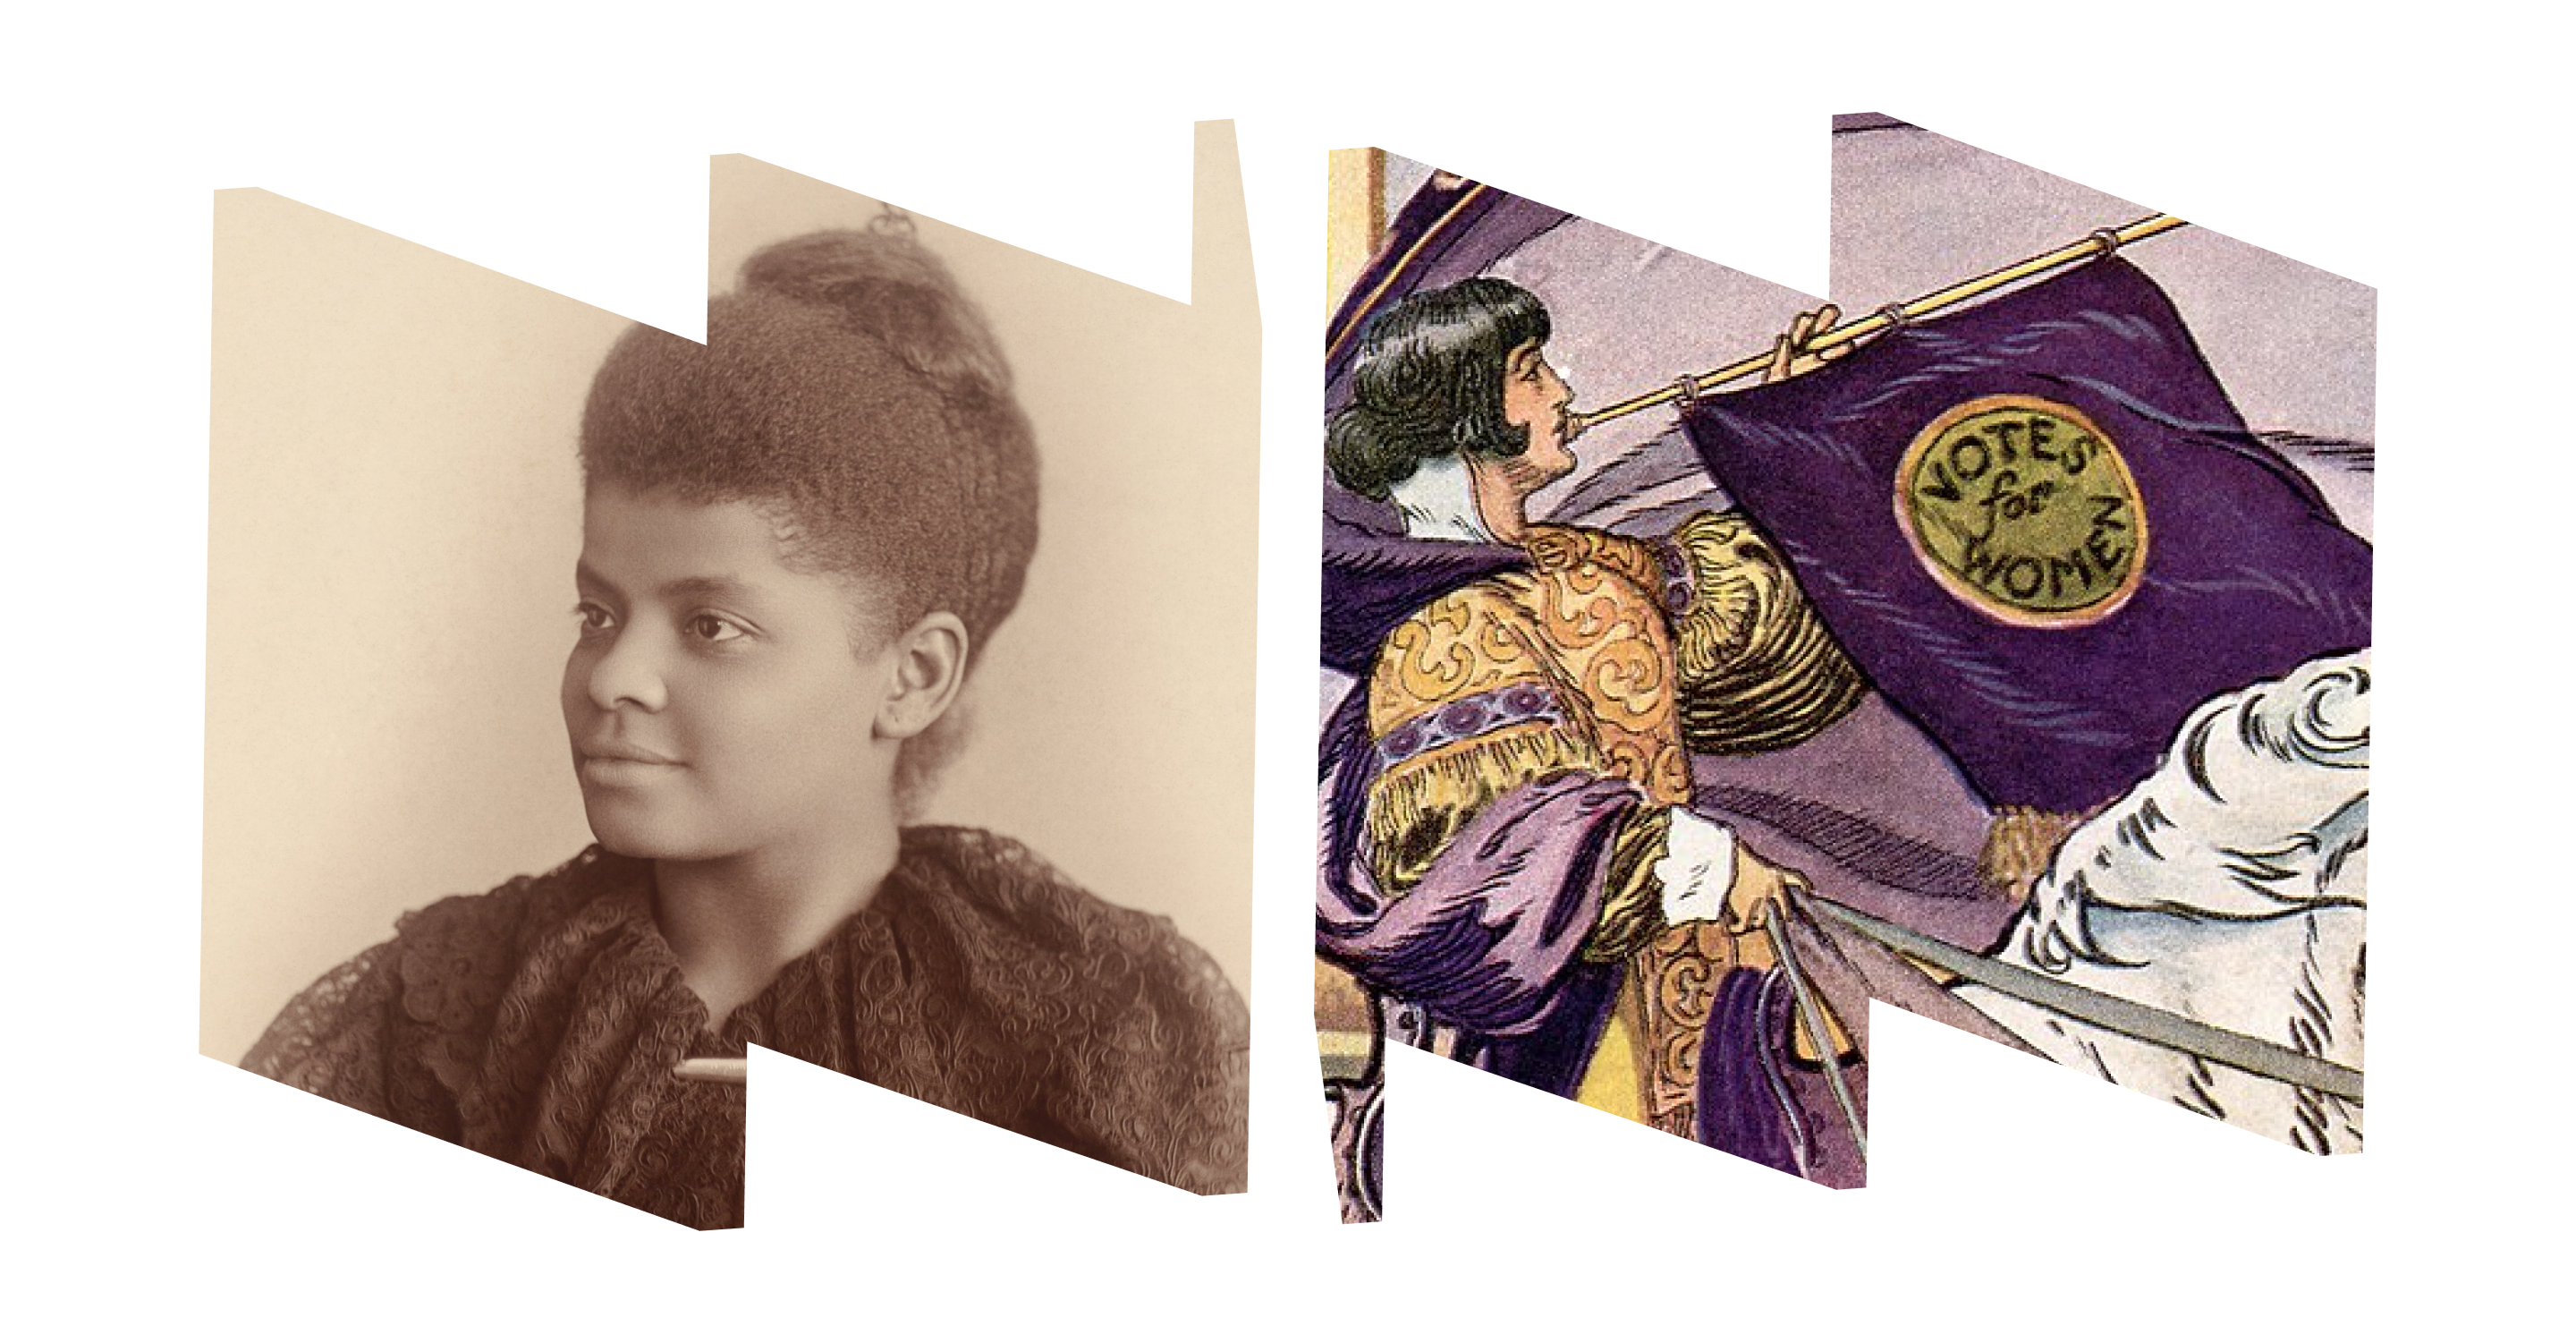 In left "W" frame, profile image of Ida B. Wells; in right "M" frame, illustration of woman on horse with "Votes for Women" banner.